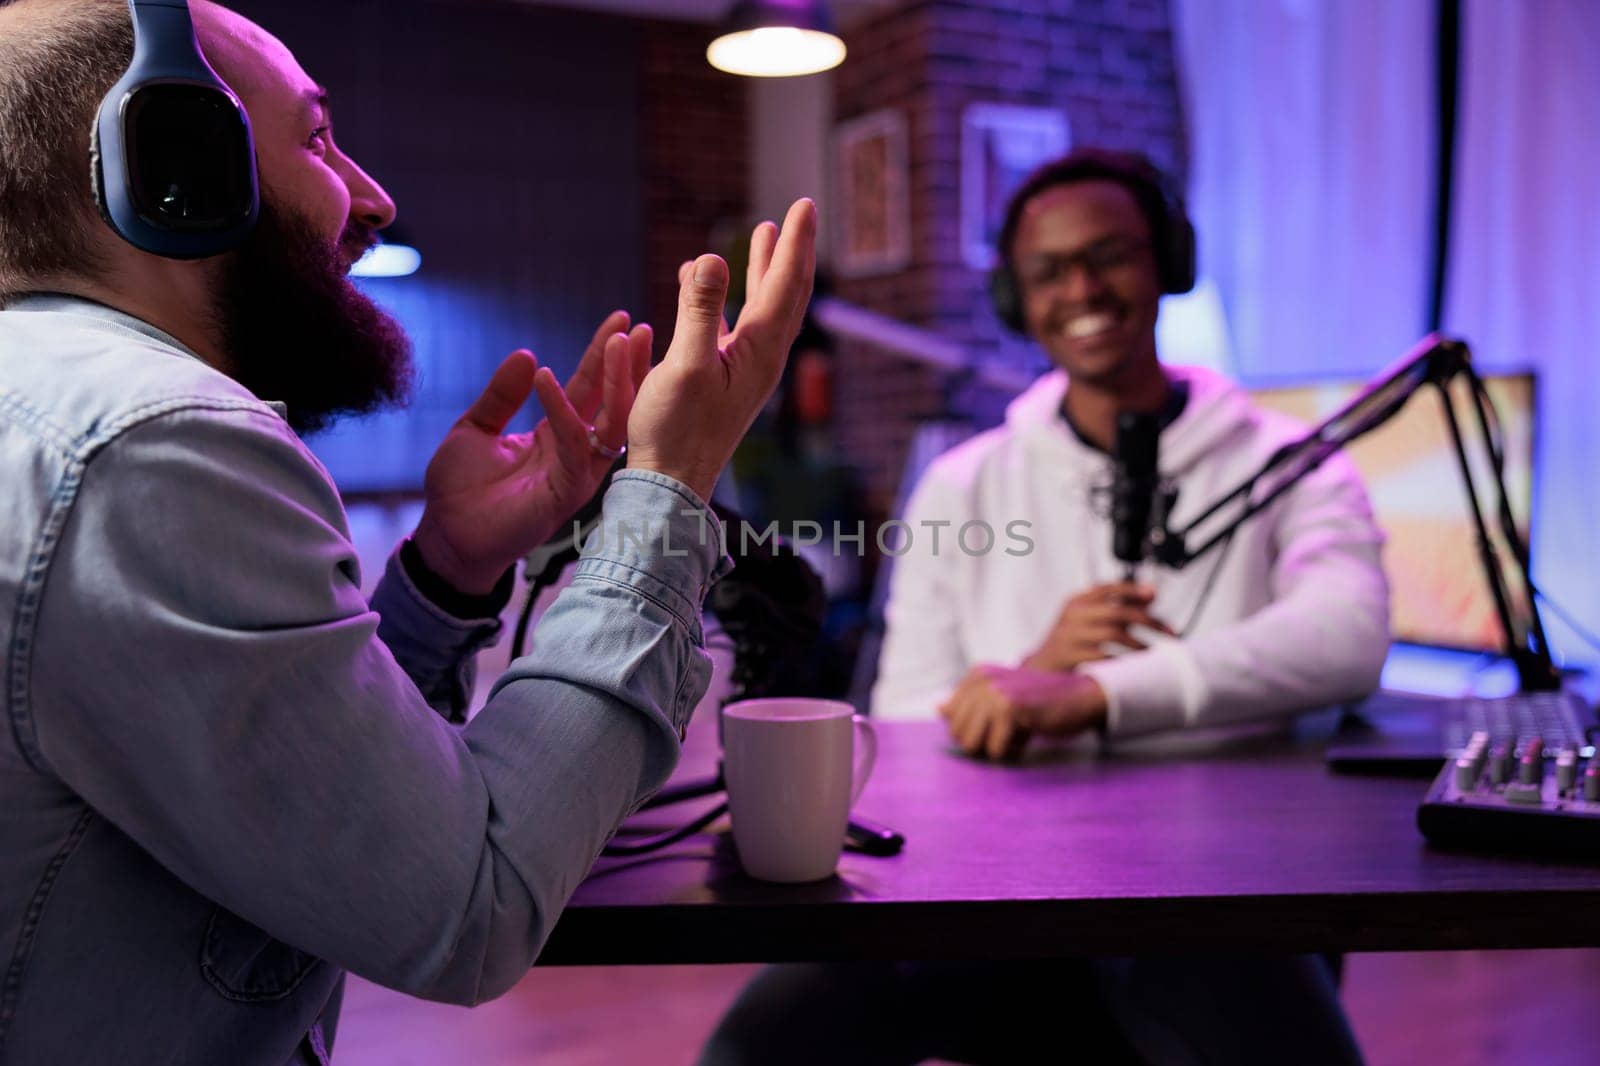 Online show host recording podcast with guest, telling jokes to eachother in home studio living room. Happy men having fun together during broadcasting session for internet streaming service